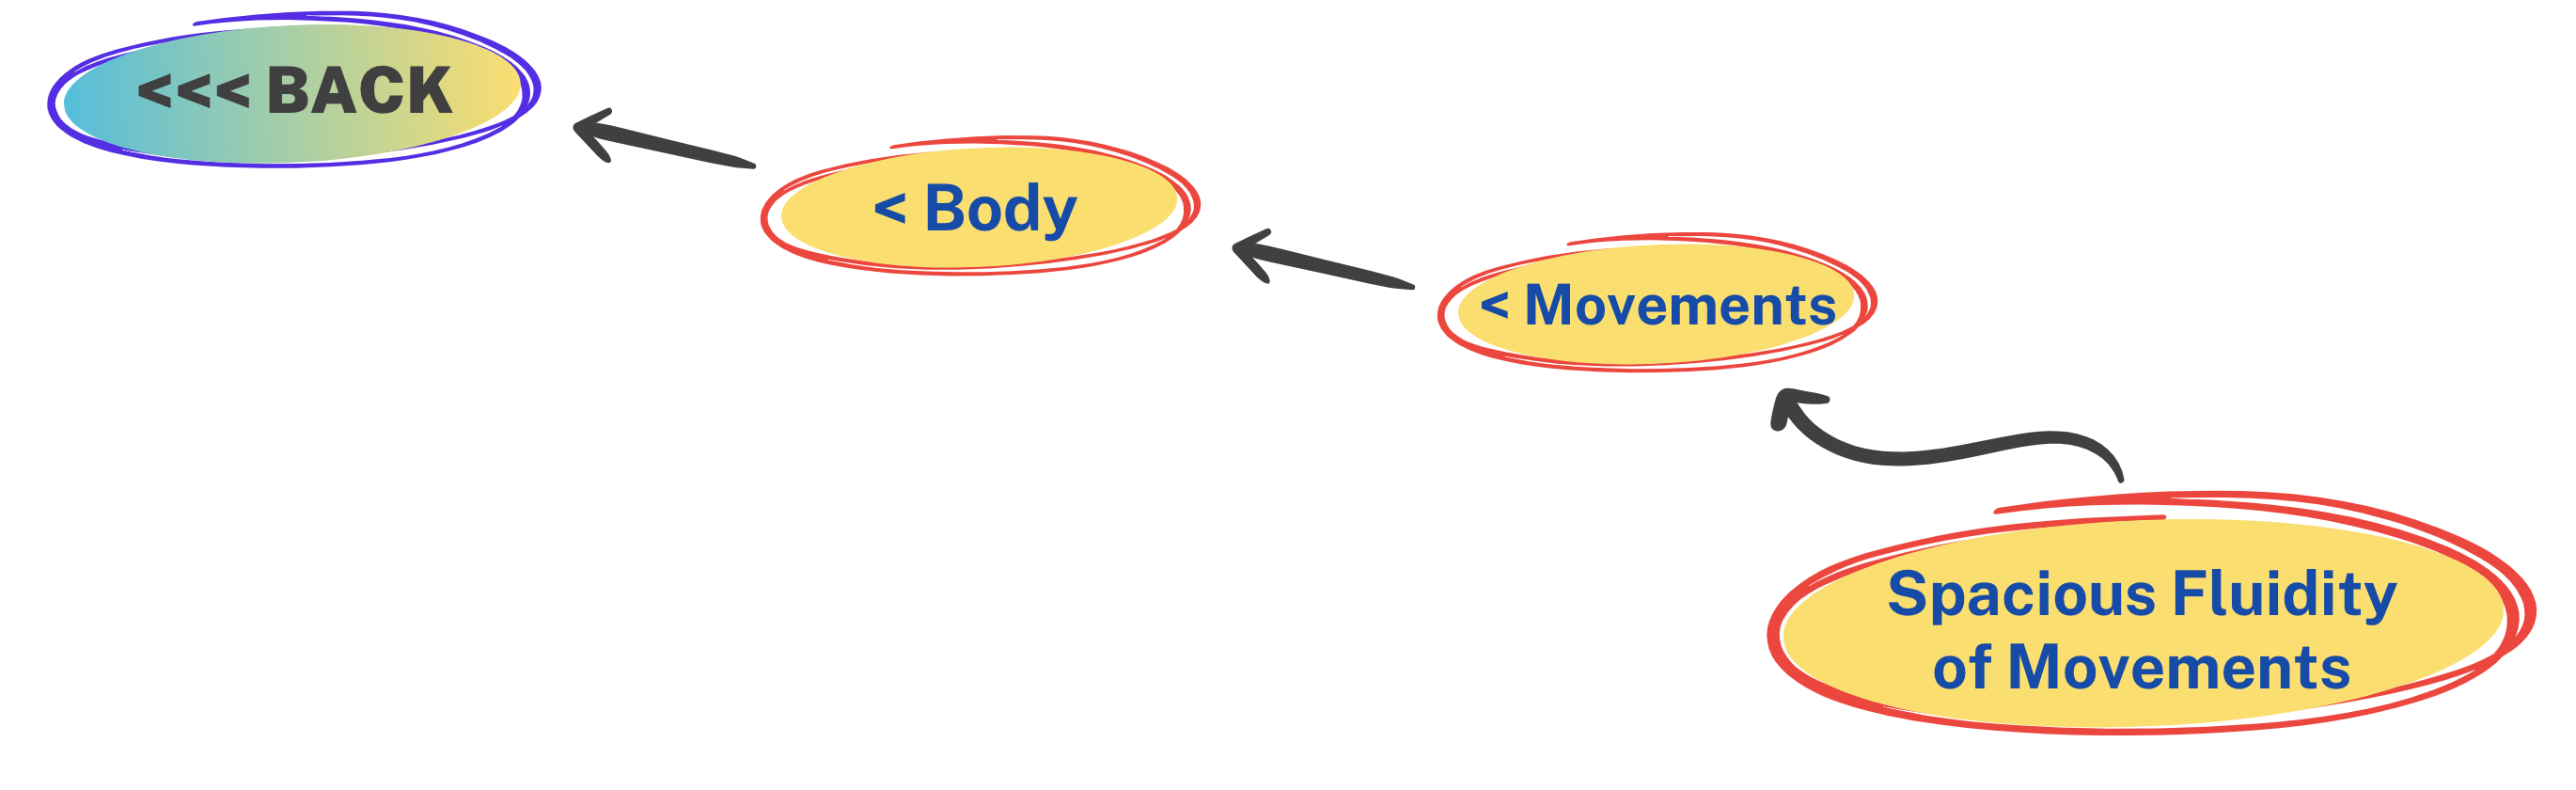 Spacious Fluidity of Movements